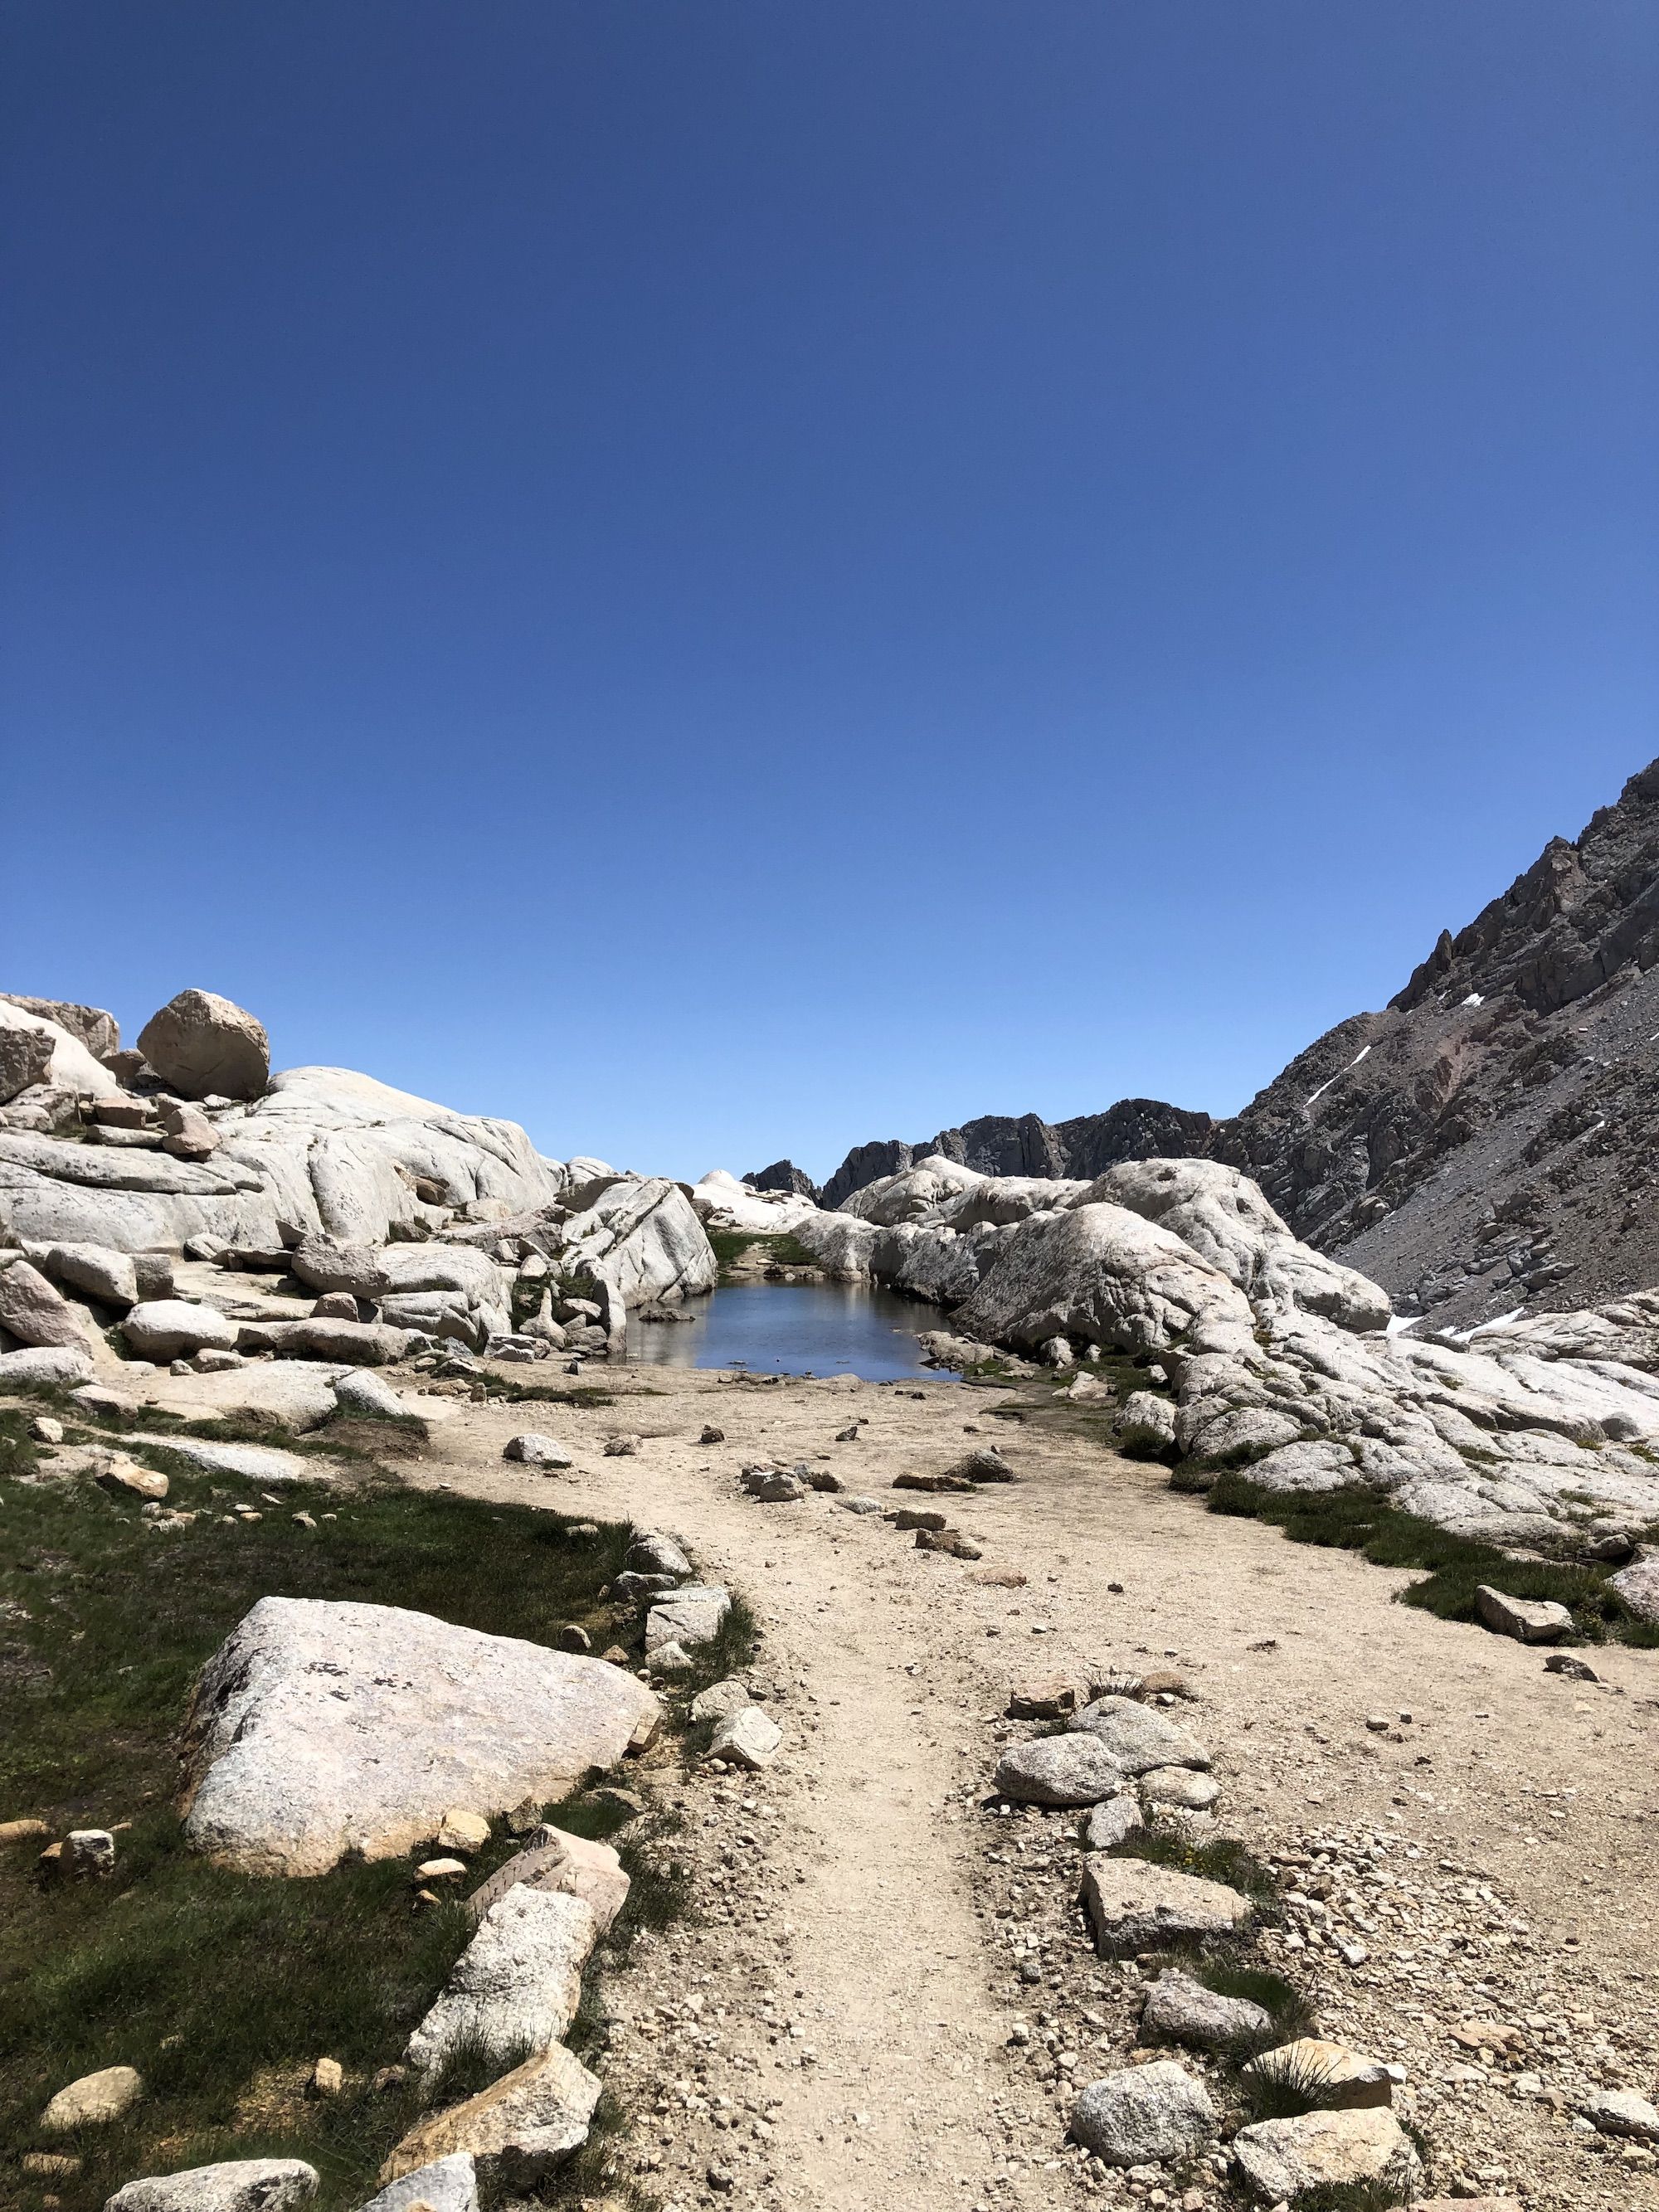 A small pond nestled in a granite mountain.